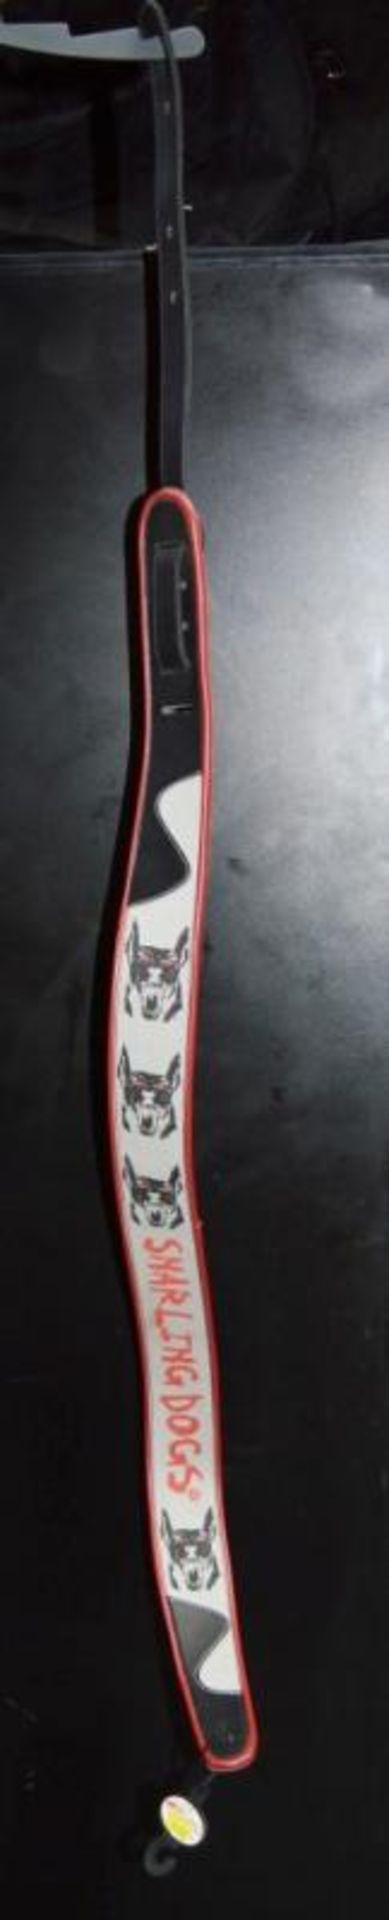 1 x Snarling Dogs Guitar Strap - CL022 - Ref SC059 - Location: Altrincham WA14 - Image 3 of 6